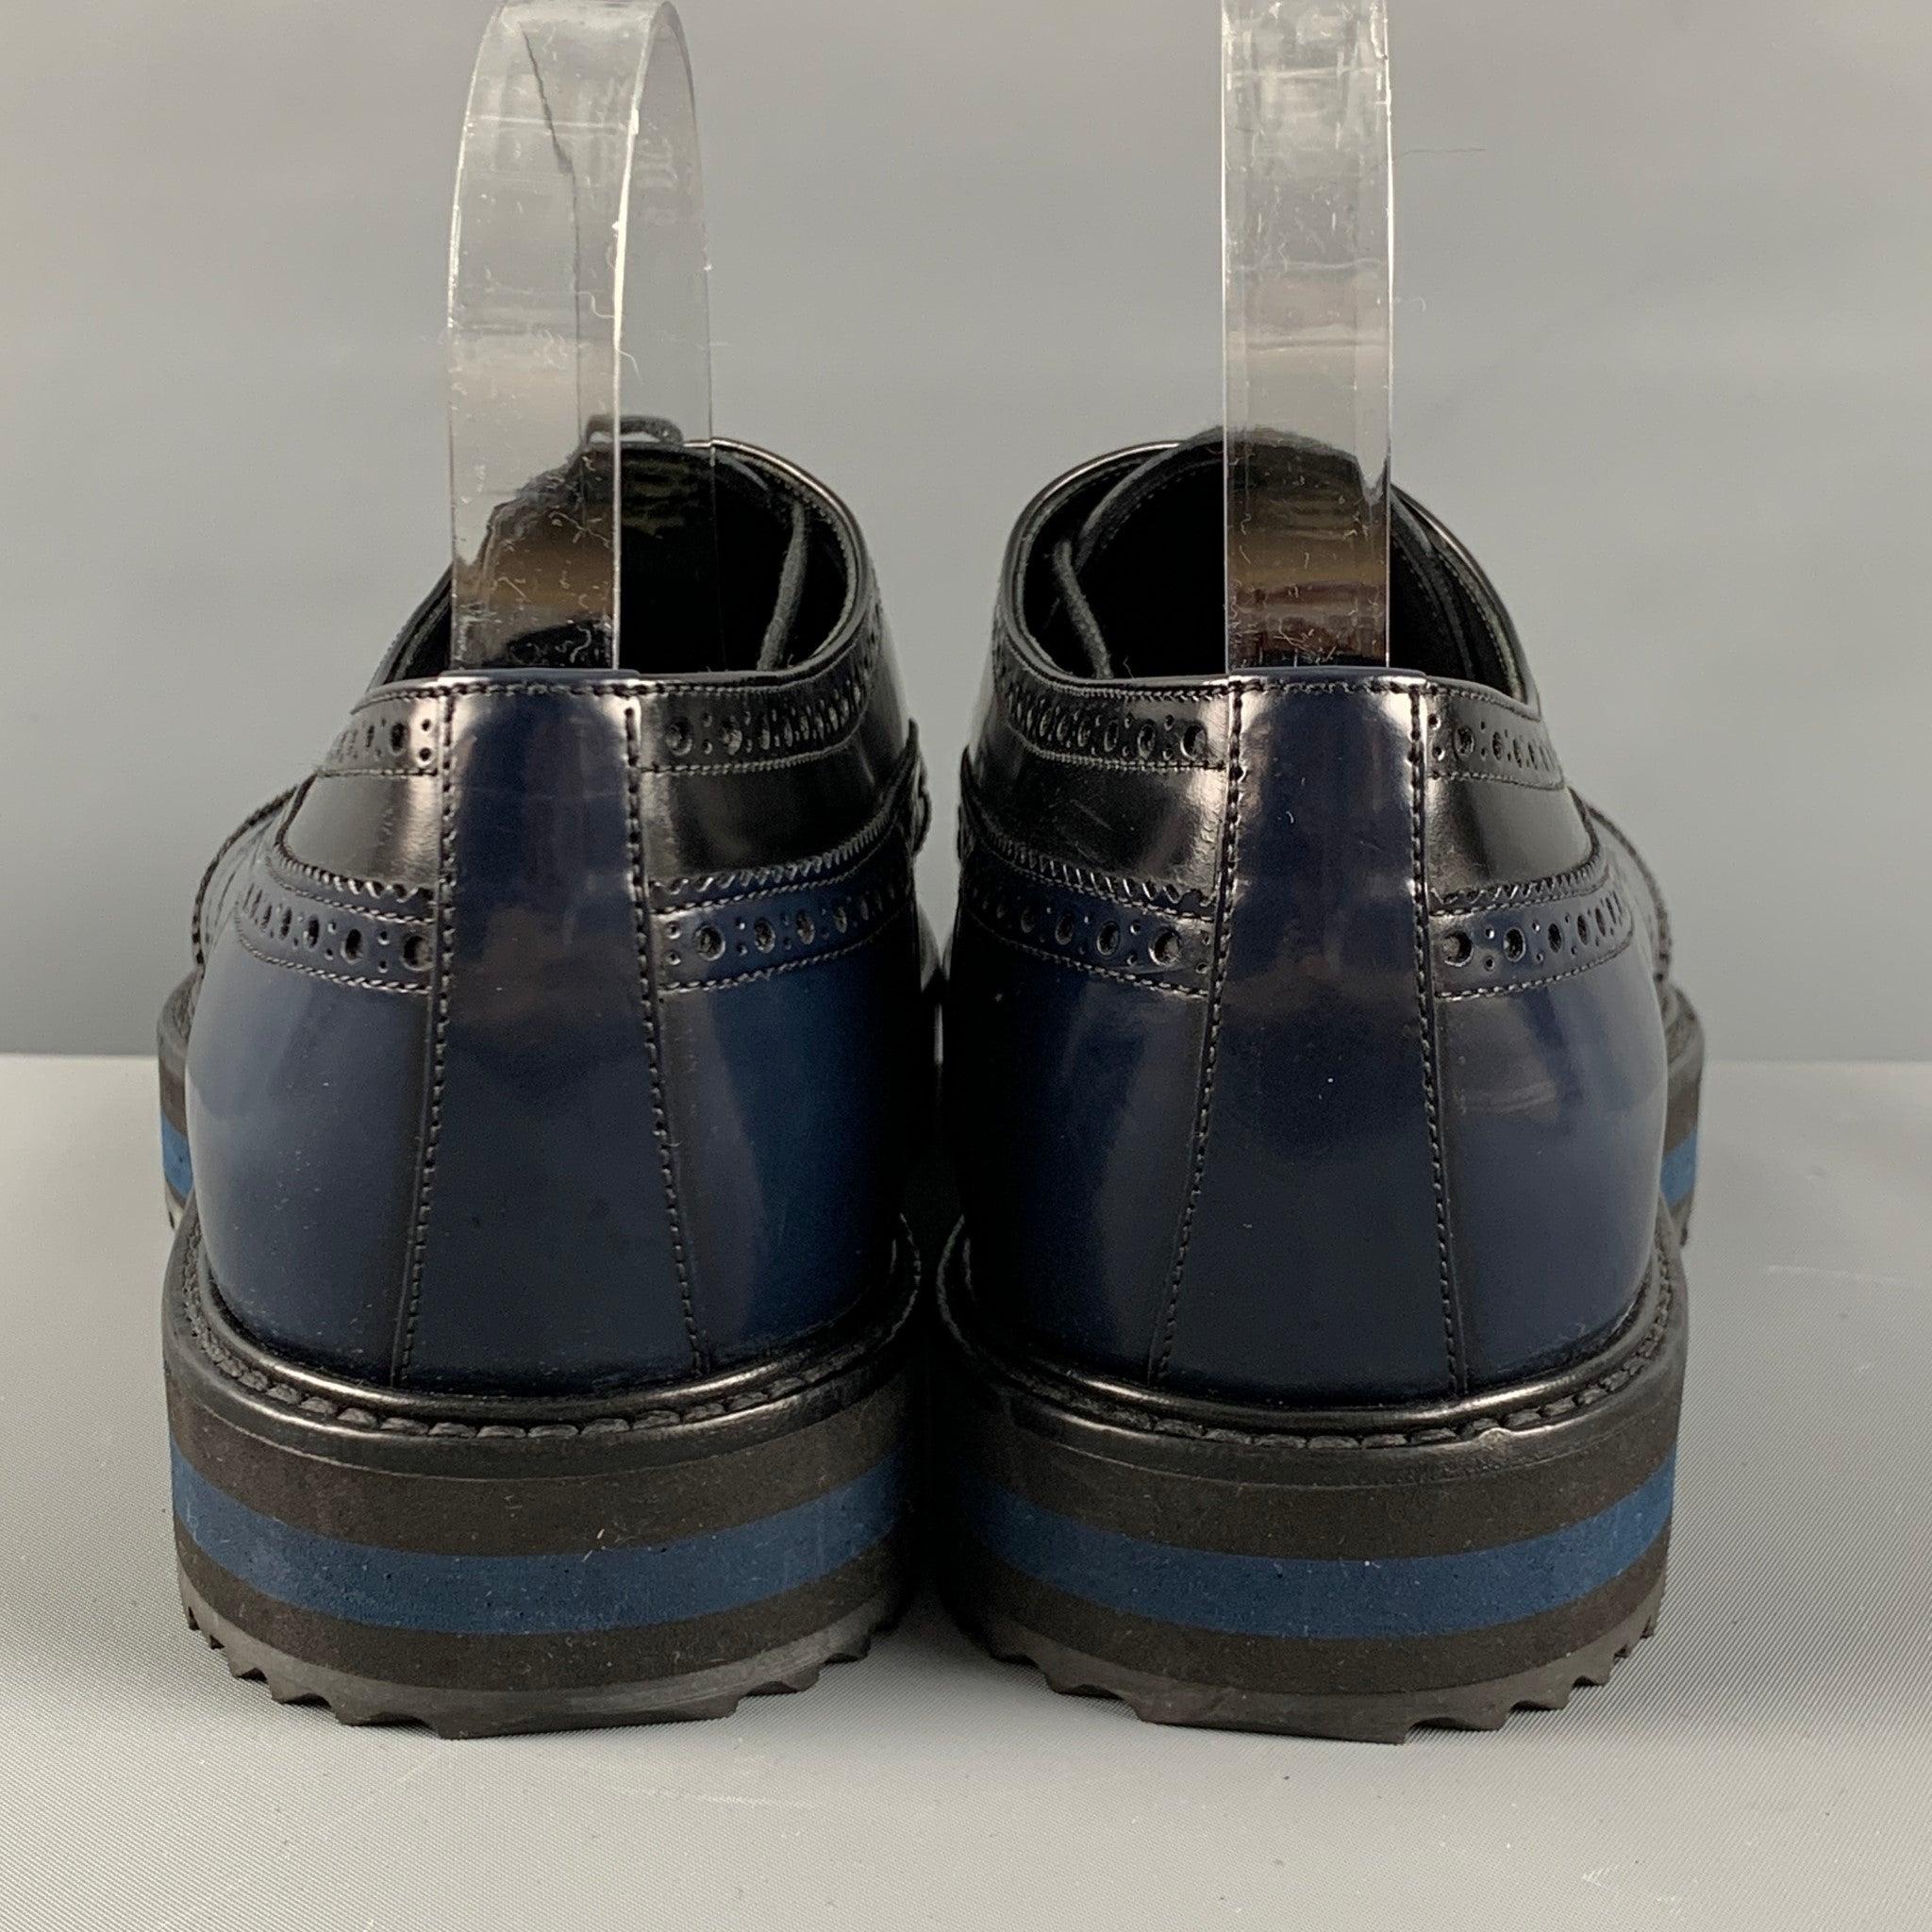 PRADA Size 11 Navy Black Perforated Leather Platform Lace Up Shoes In Excellent Condition For Sale In San Francisco, CA